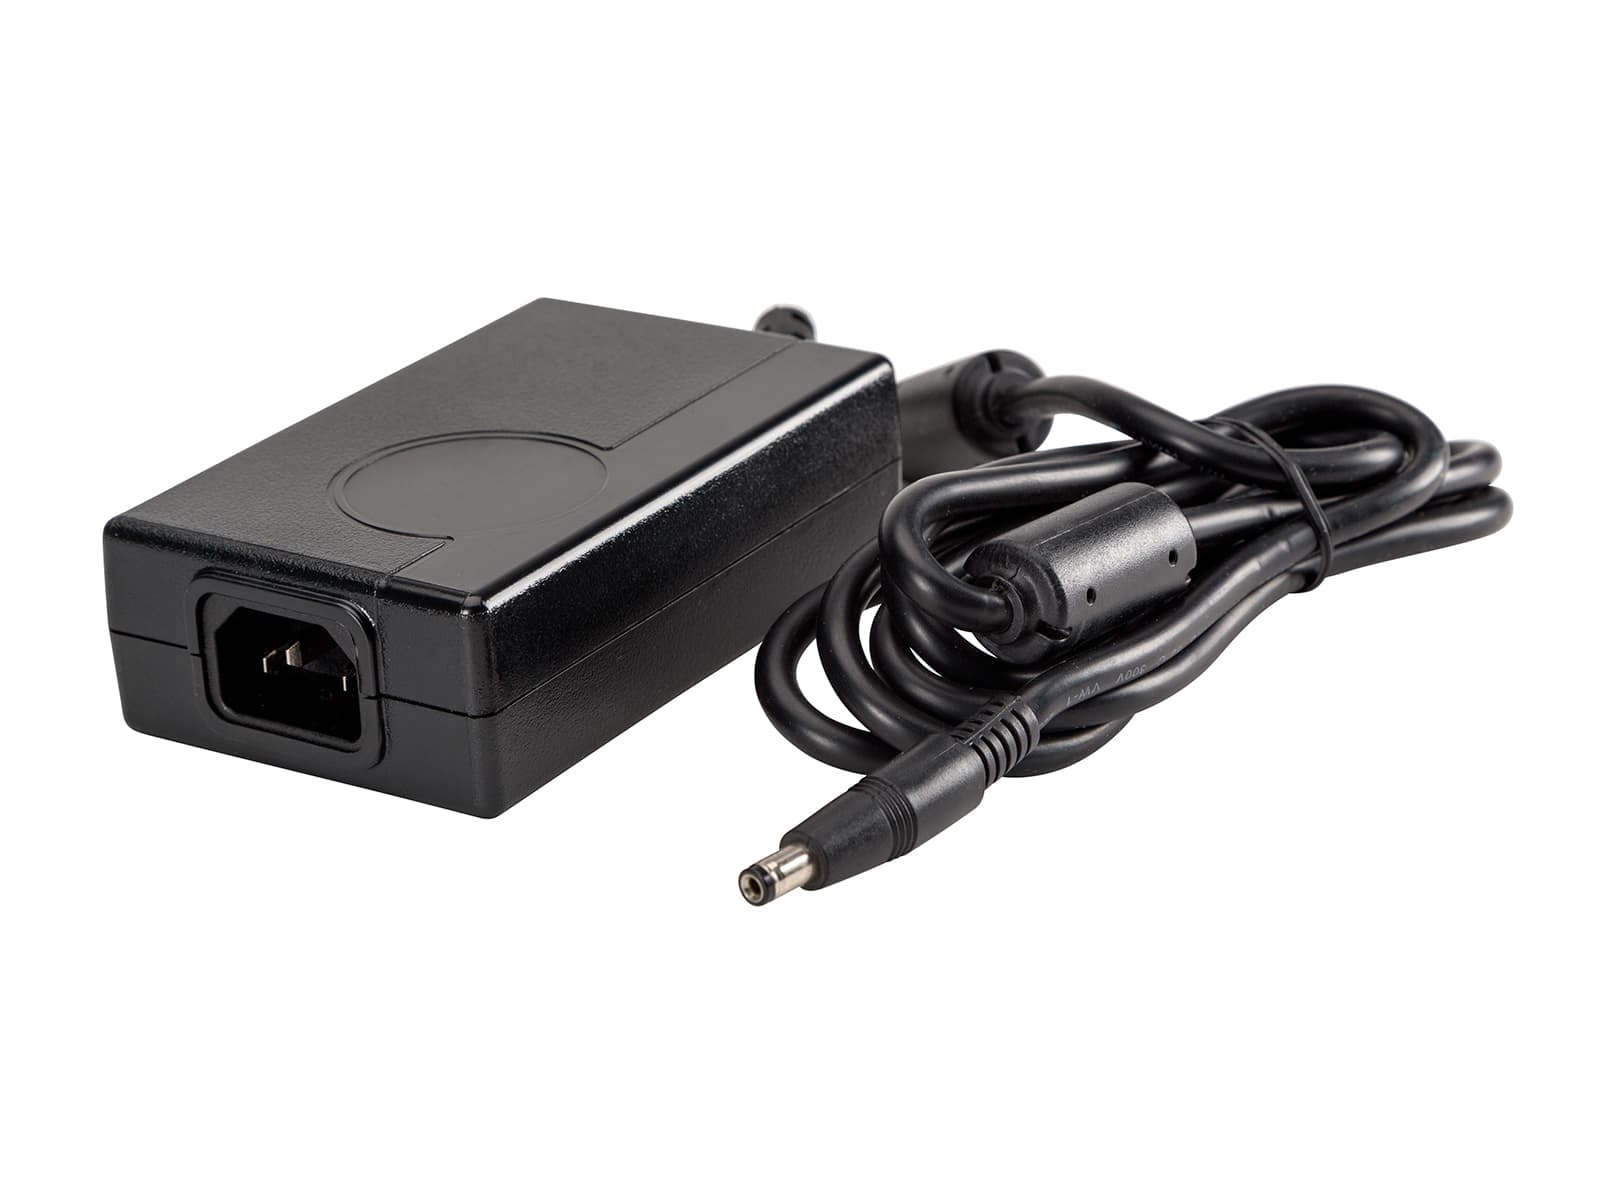 BridgePower Corp. 12V 5.0A Medical Power Supply AC Adapter for Barco Medical Displays  (BPM060S12F03) Monitors.com 